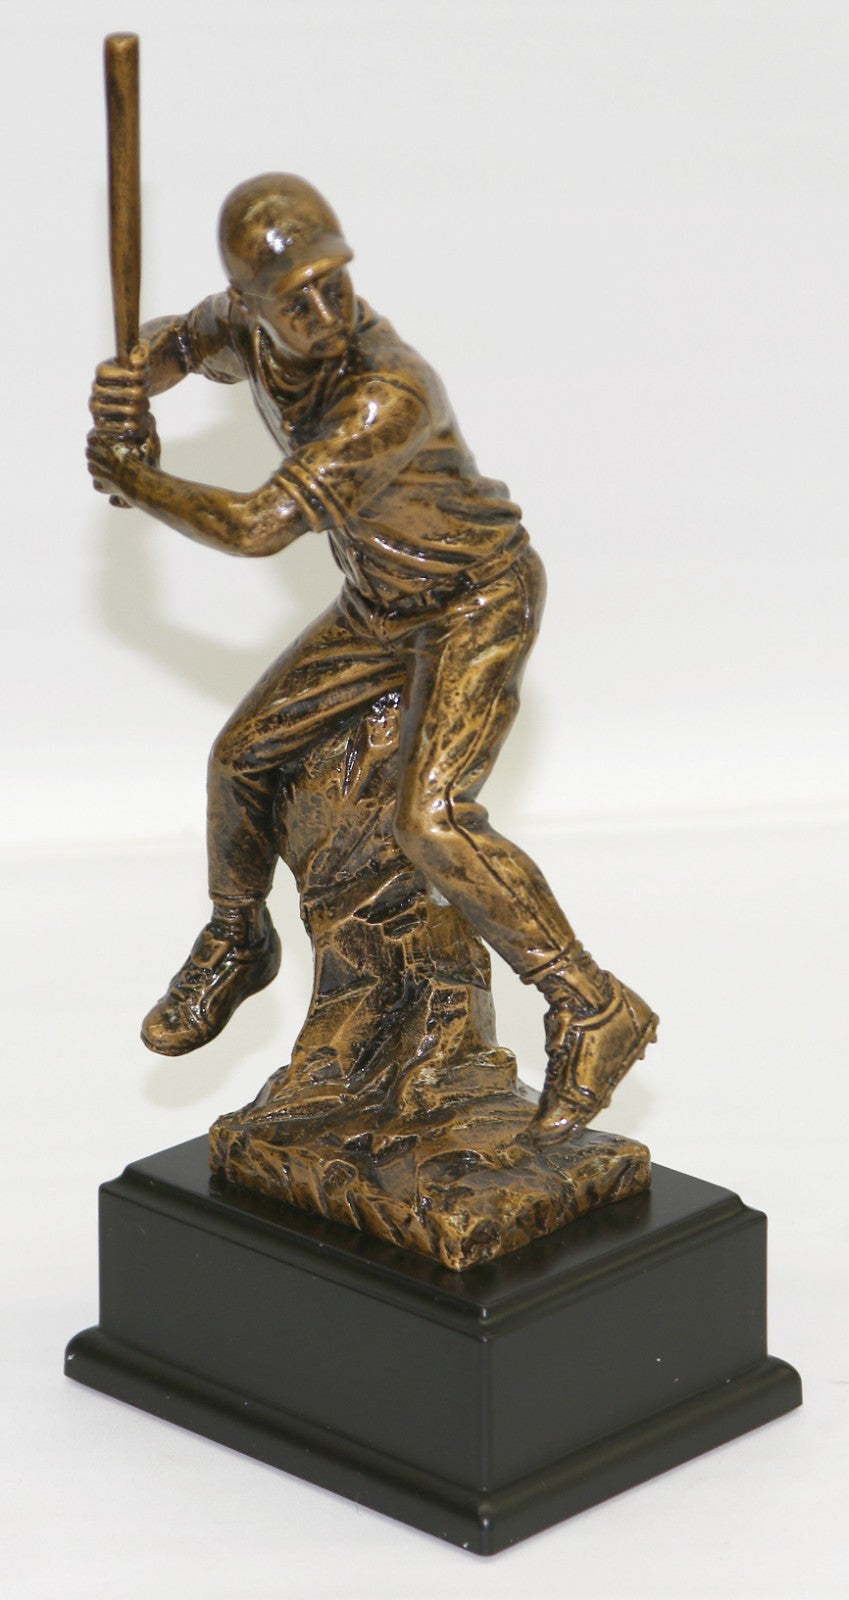 Bronze Sculpture Handcrafted Collectible Baseball Player by Milo Figurine Figure